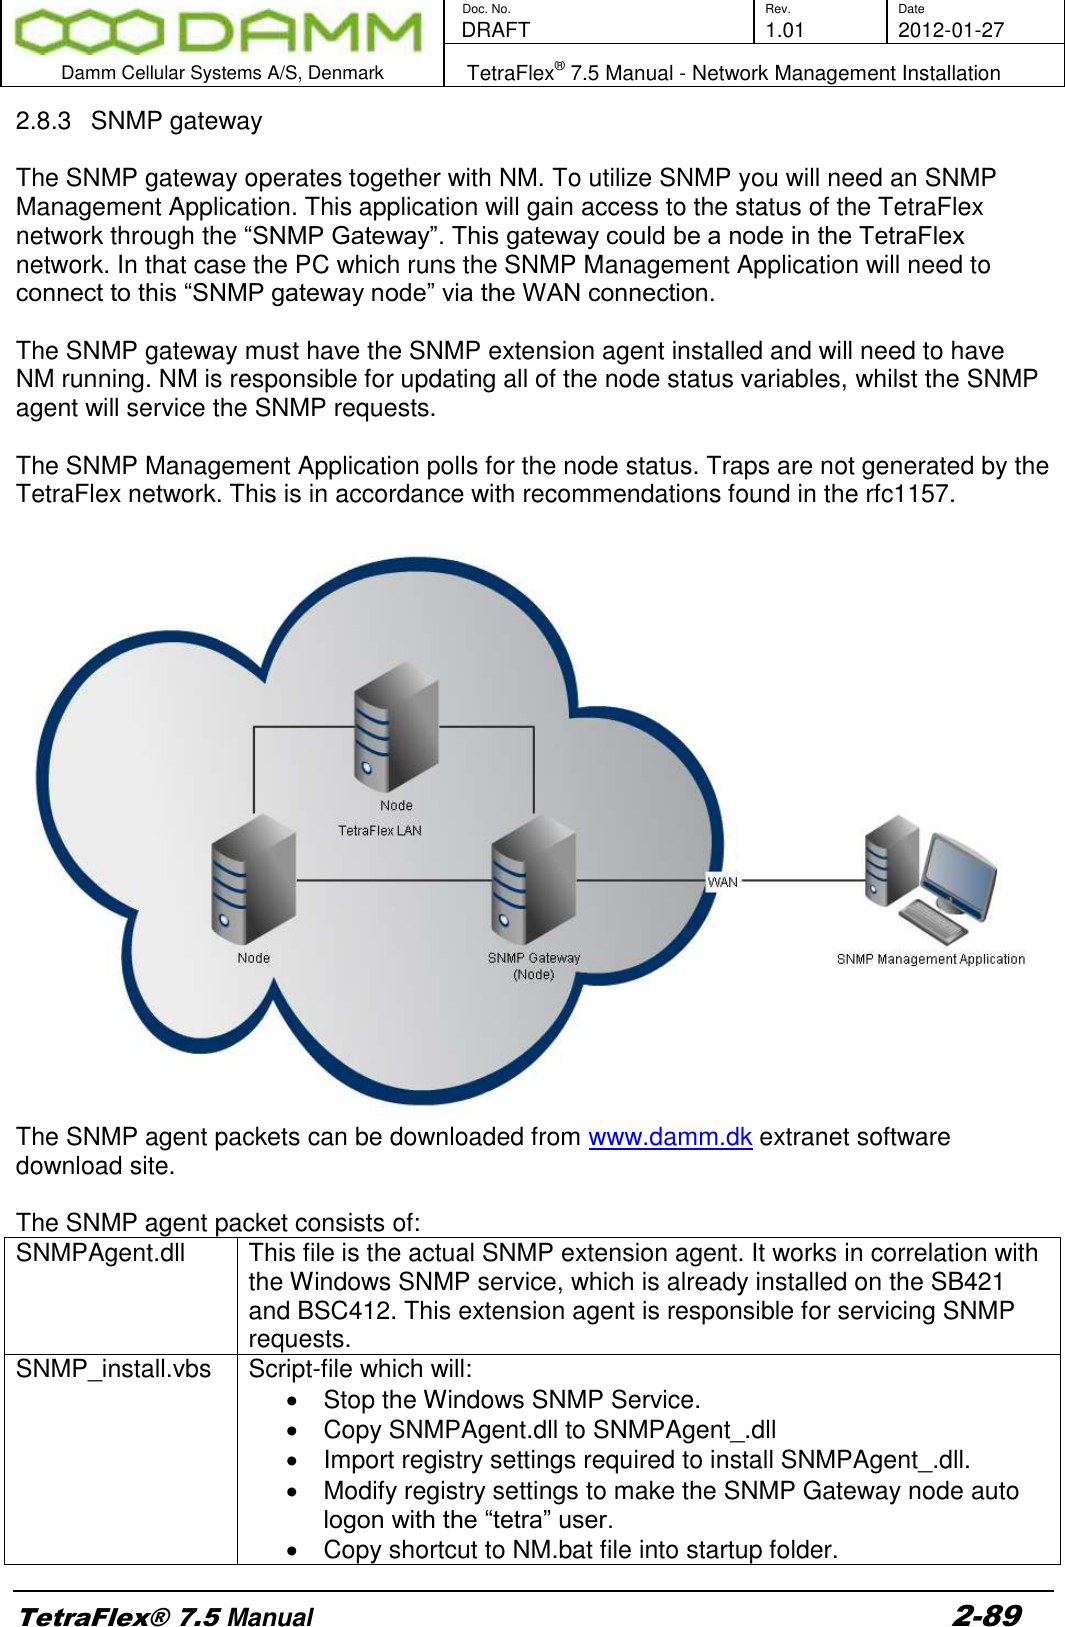        Doc. No. Rev. Date    DRAFT  1.01 2012-01-27  Damm Cellular Systems A/S, Denmark   TetraFlex® 7.5 Manual - Network Management Installation  TetraFlex® 7.5 Manual 2-89 2.8.3  SNMP gateway  The SNMP gateway operates together with NM. To utilize SNMP you will need an SNMP Management Application. This application will gain access to the status of the TetraFlex network through the “SNMP Gateway”. This gateway could be a node in the TetraFlex network. In that case the PC which runs the SNMP Management Application will need to connect to this “SNMP gateway node” via the WAN connection.  The SNMP gateway must have the SNMP extension agent installed and will need to have NM running. NM is responsible for updating all of the node status variables, whilst the SNMP agent will service the SNMP requests.  The SNMP Management Application polls for the node status. Traps are not generated by the TetraFlex network. This is in accordance with recommendations found in the rfc1157.   The SNMP agent packets can be downloaded from www.damm.dk extranet software download site.  The SNMP agent packet consists of: SNMPAgent.dll This file is the actual SNMP extension agent. It works in correlation with the Windows SNMP service, which is already installed on the SB421 and BSC412. This extension agent is responsible for servicing SNMP requests. SNMP_install.vbs Script-file which will:   Stop the Windows SNMP Service.   Copy SNMPAgent.dll to SNMPAgent_.dll   Import registry settings required to install SNMPAgent_.dll.    Modify registry settings to make the SNMP Gateway node auto logon with the “tetra” user.   Copy shortcut to NM.bat file into startup folder. 